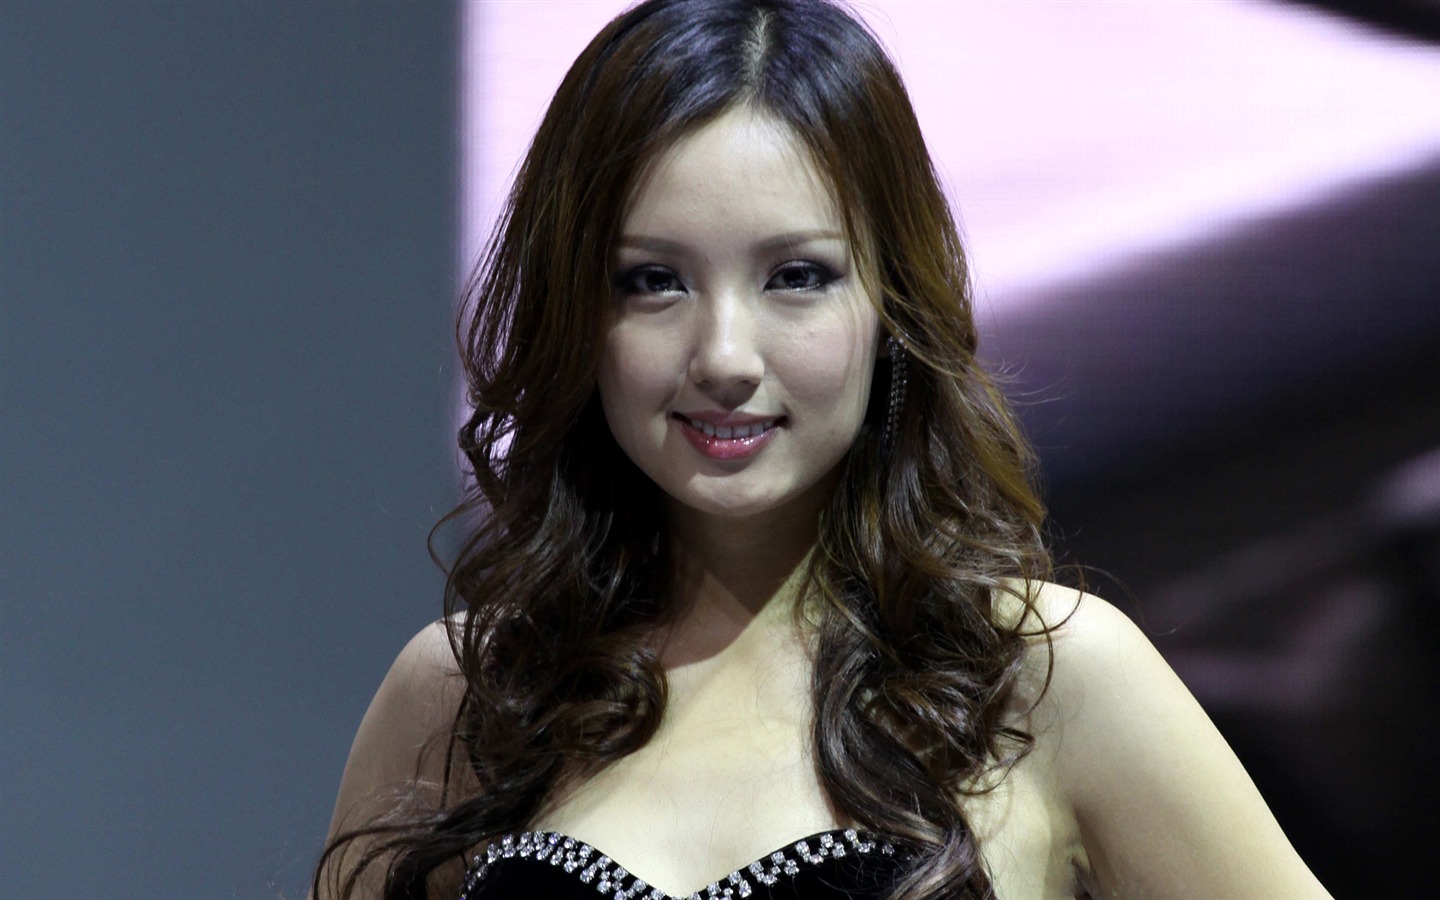 2010 Beijing Auto Show car models Collection (2) #5 - 1440x900